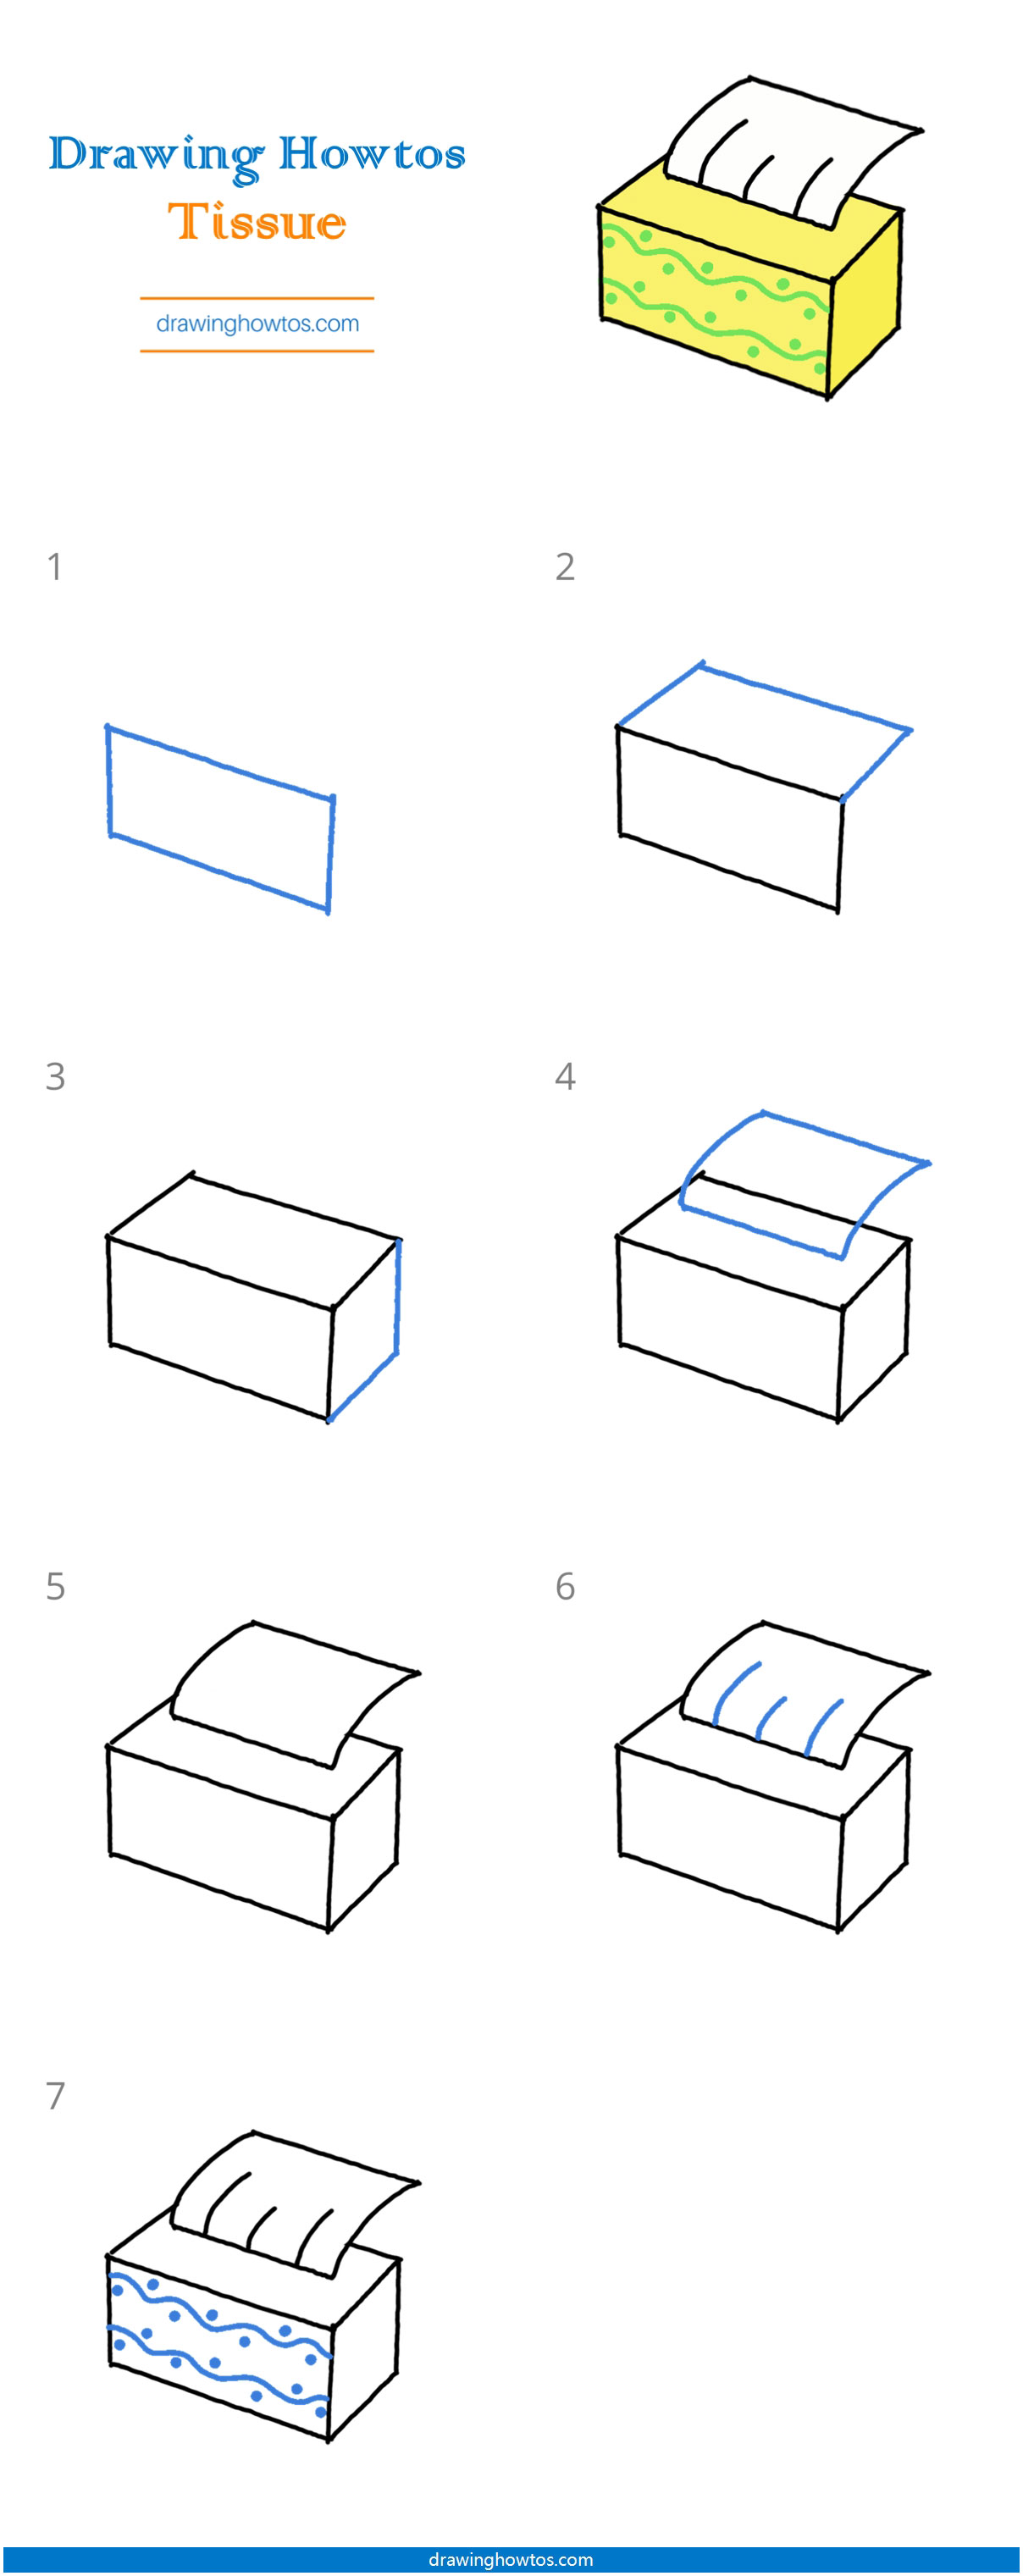 How to Draw a Tissue Box Step by Step